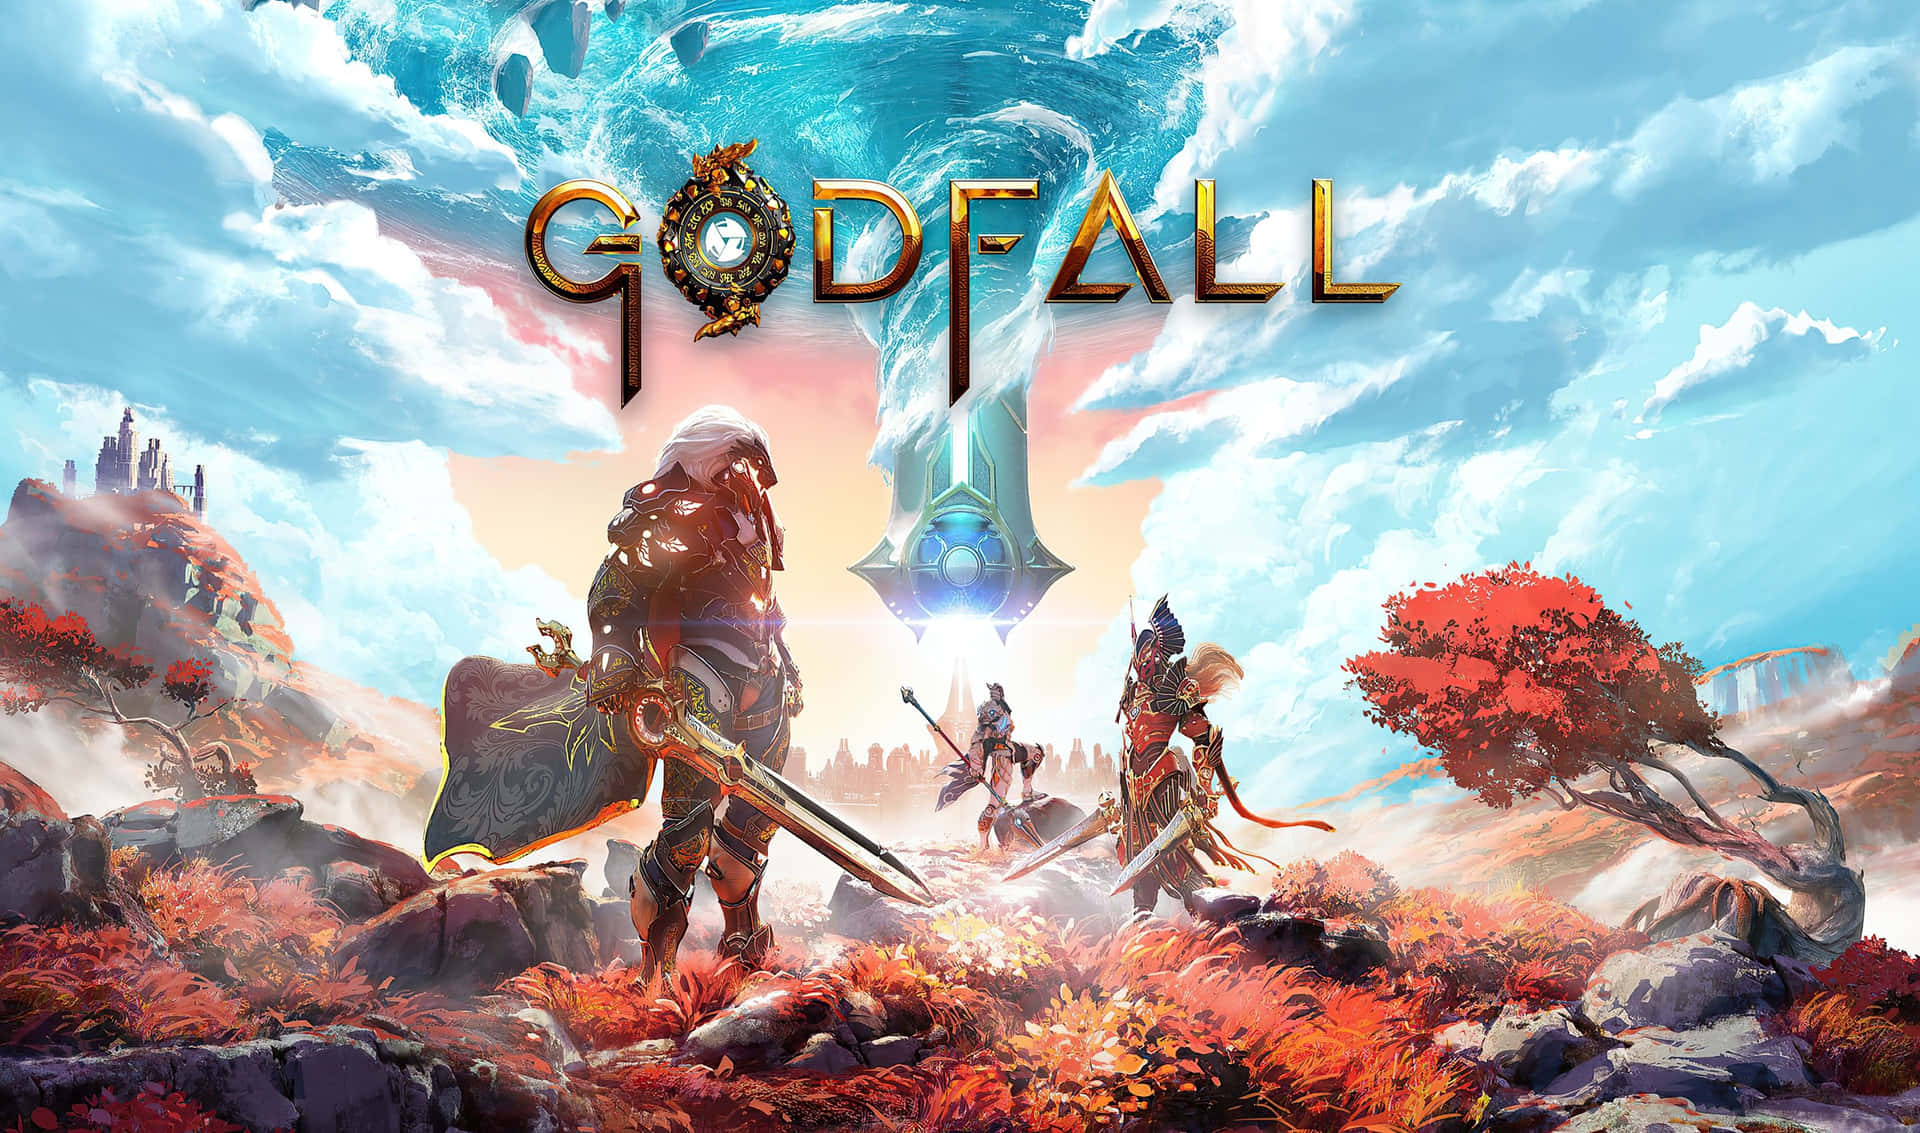 Experience Adventure And Epic Battles In Godfall